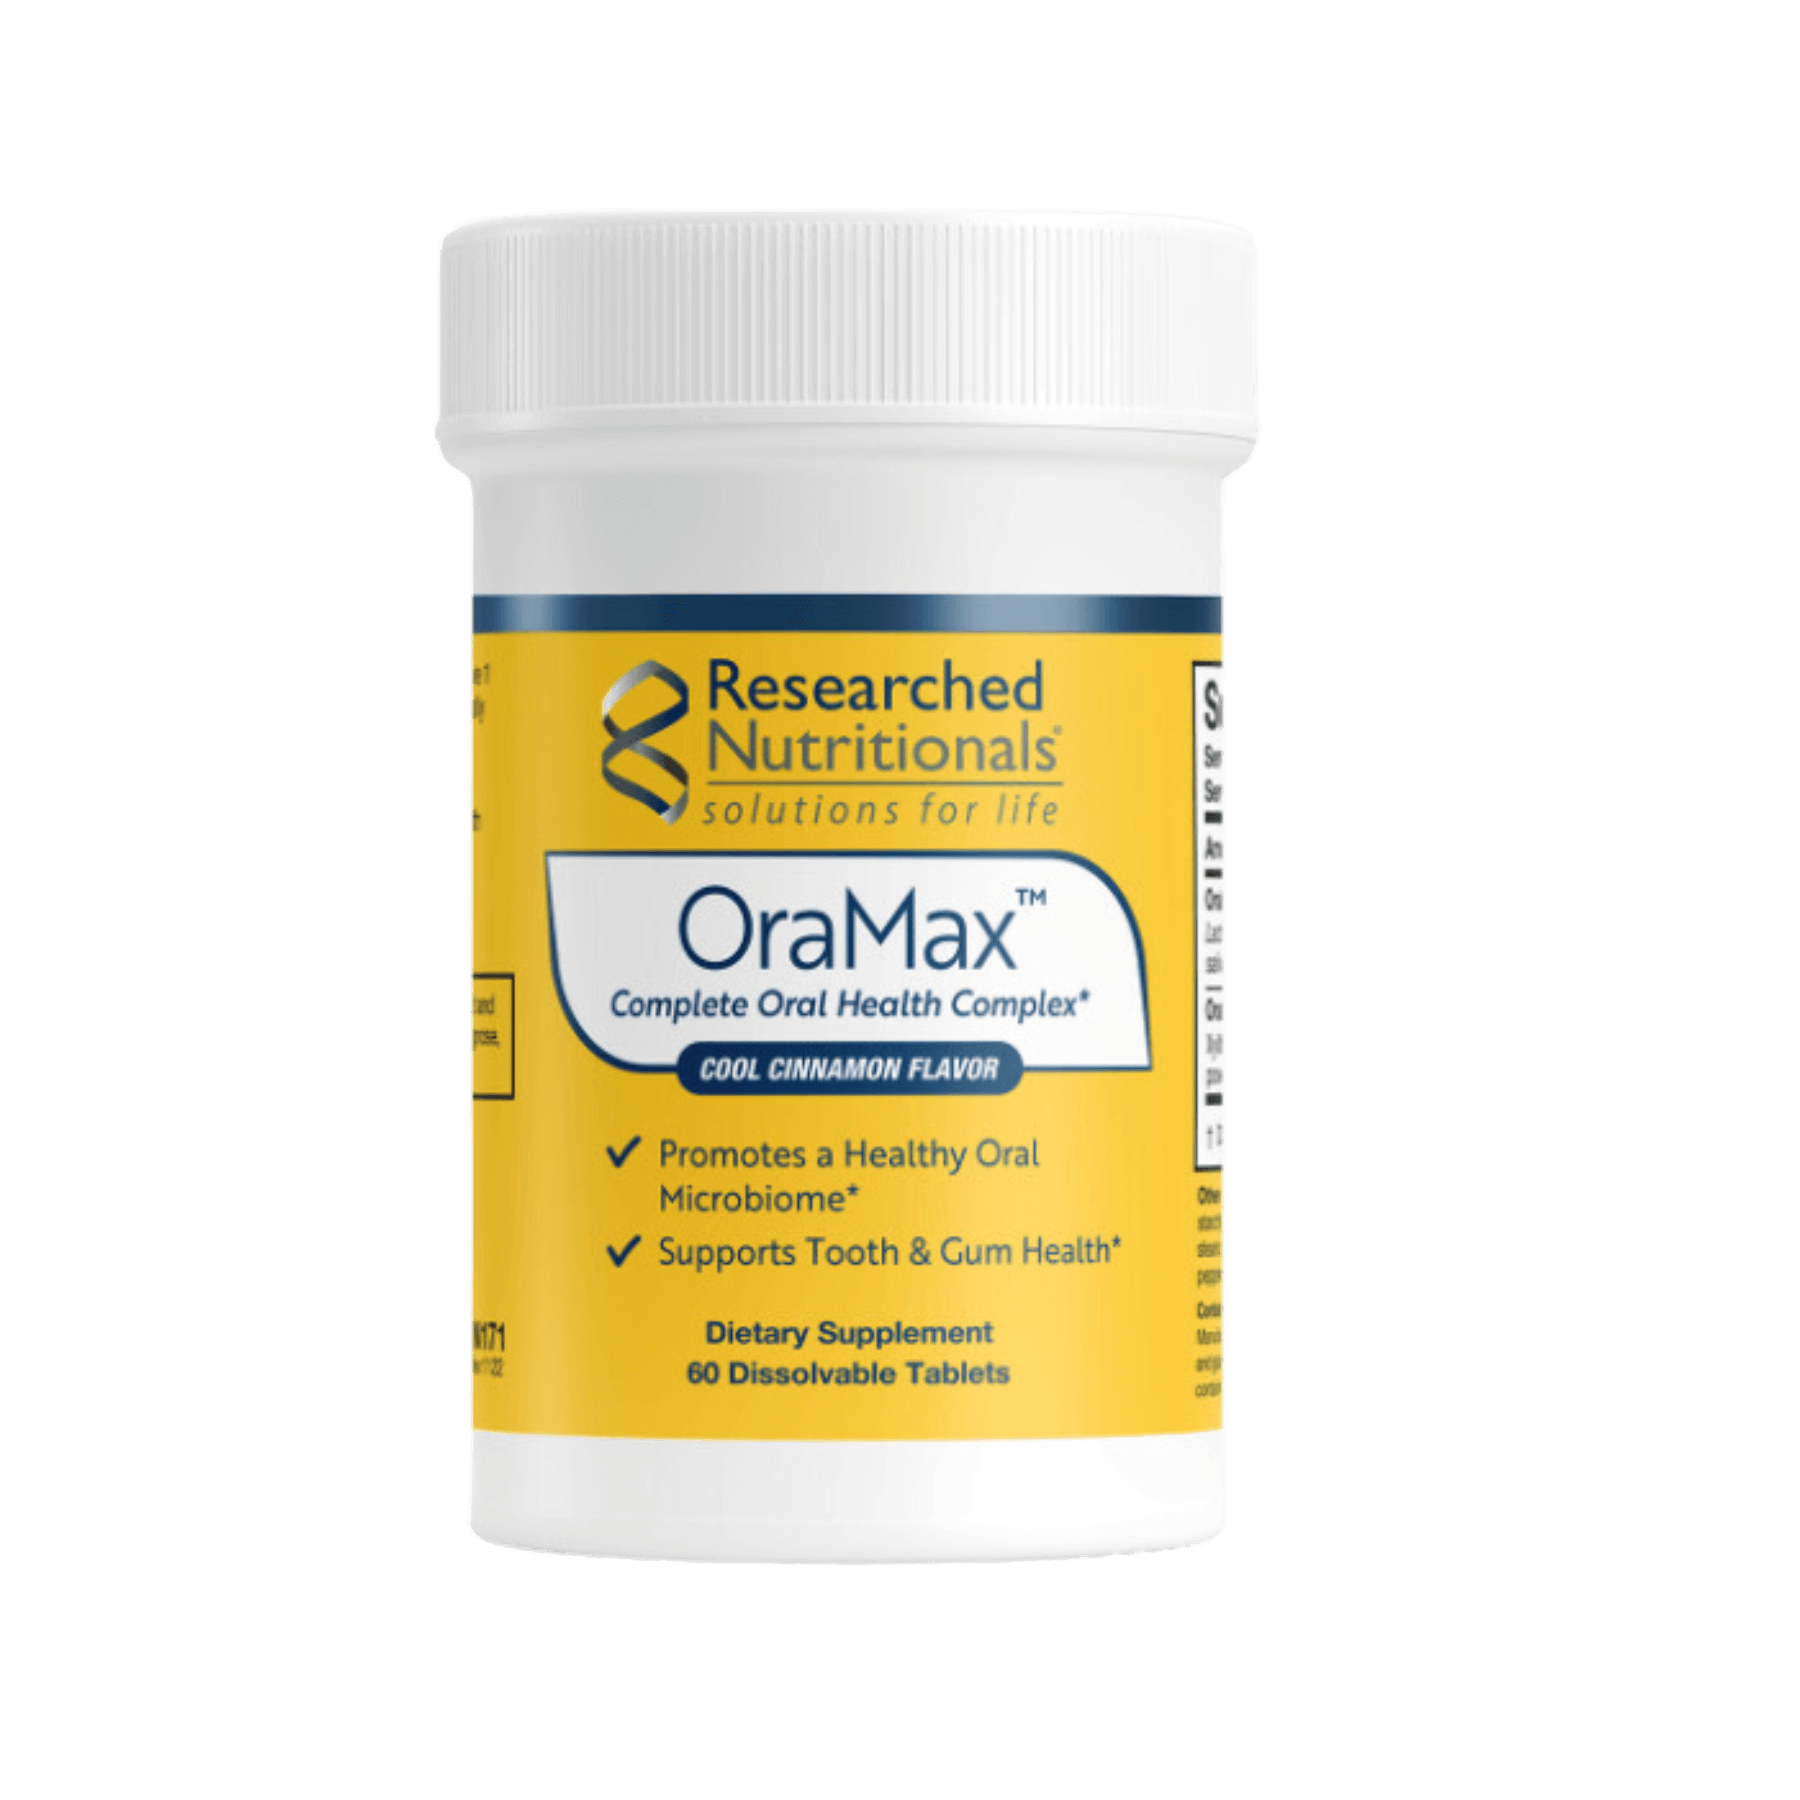 Researched Nutritionals OraMax Tablets